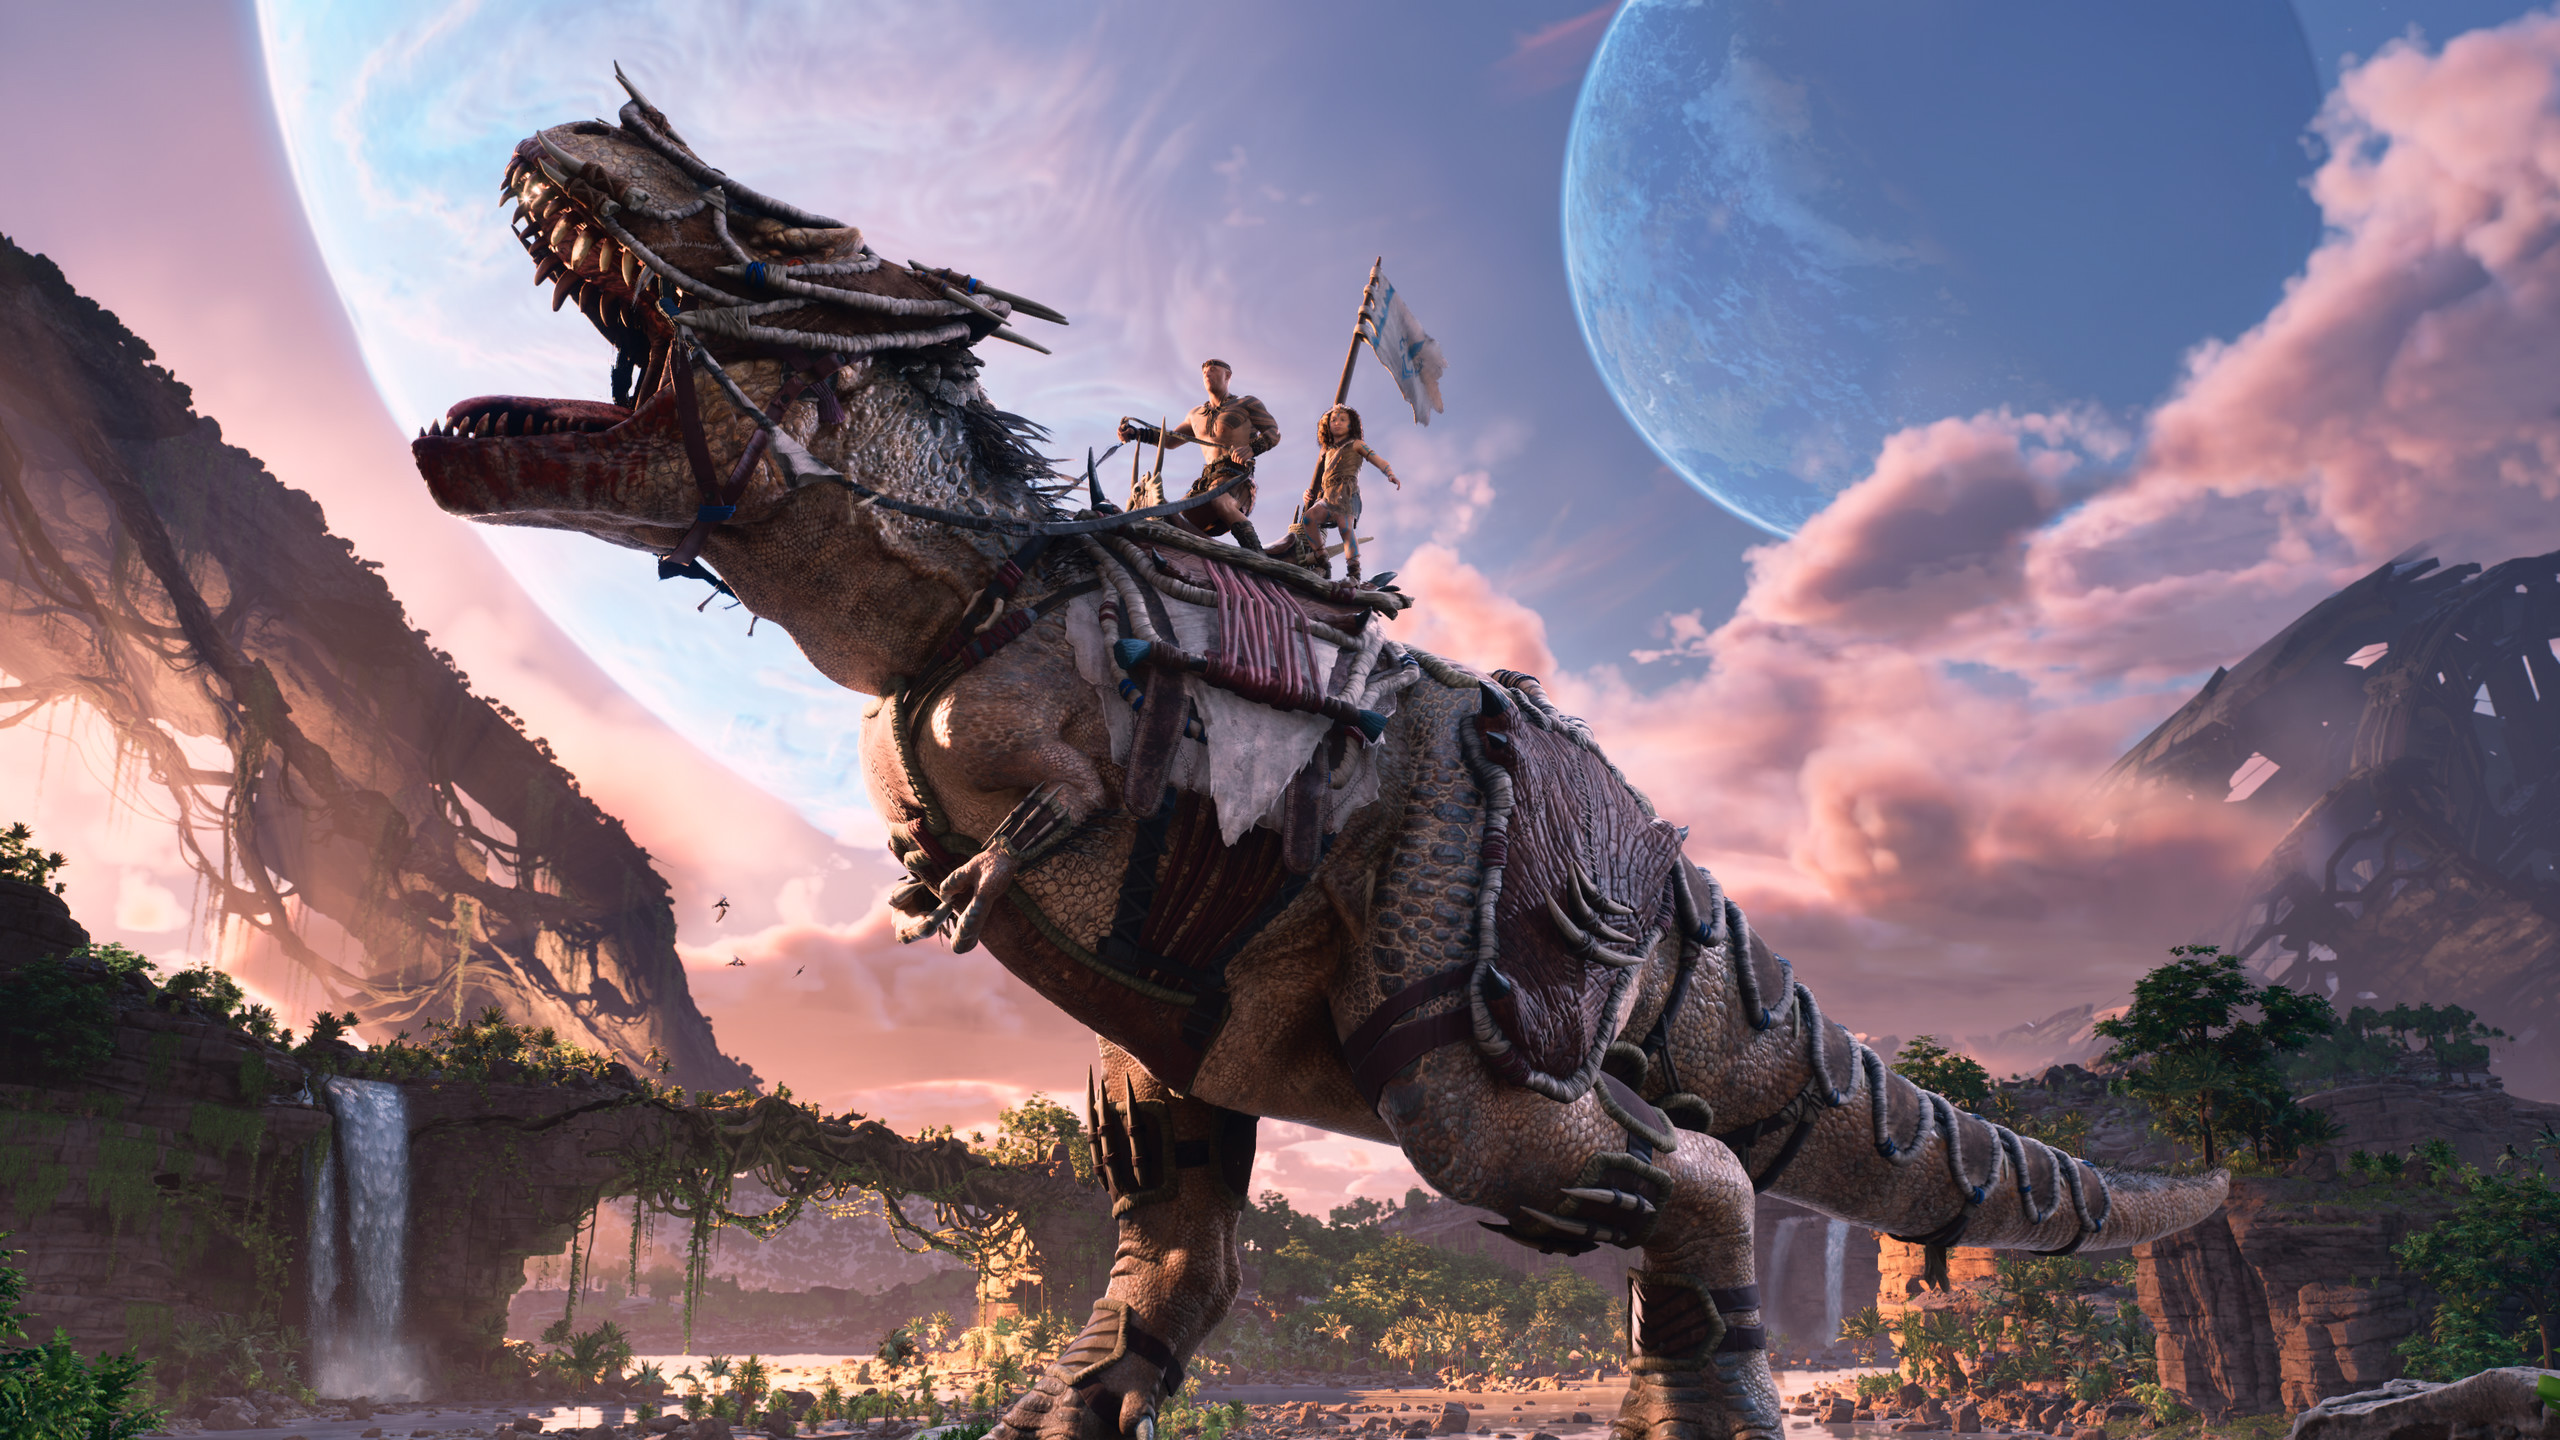  Ark 2: Release date, platforms, trailers, gameplay, and more